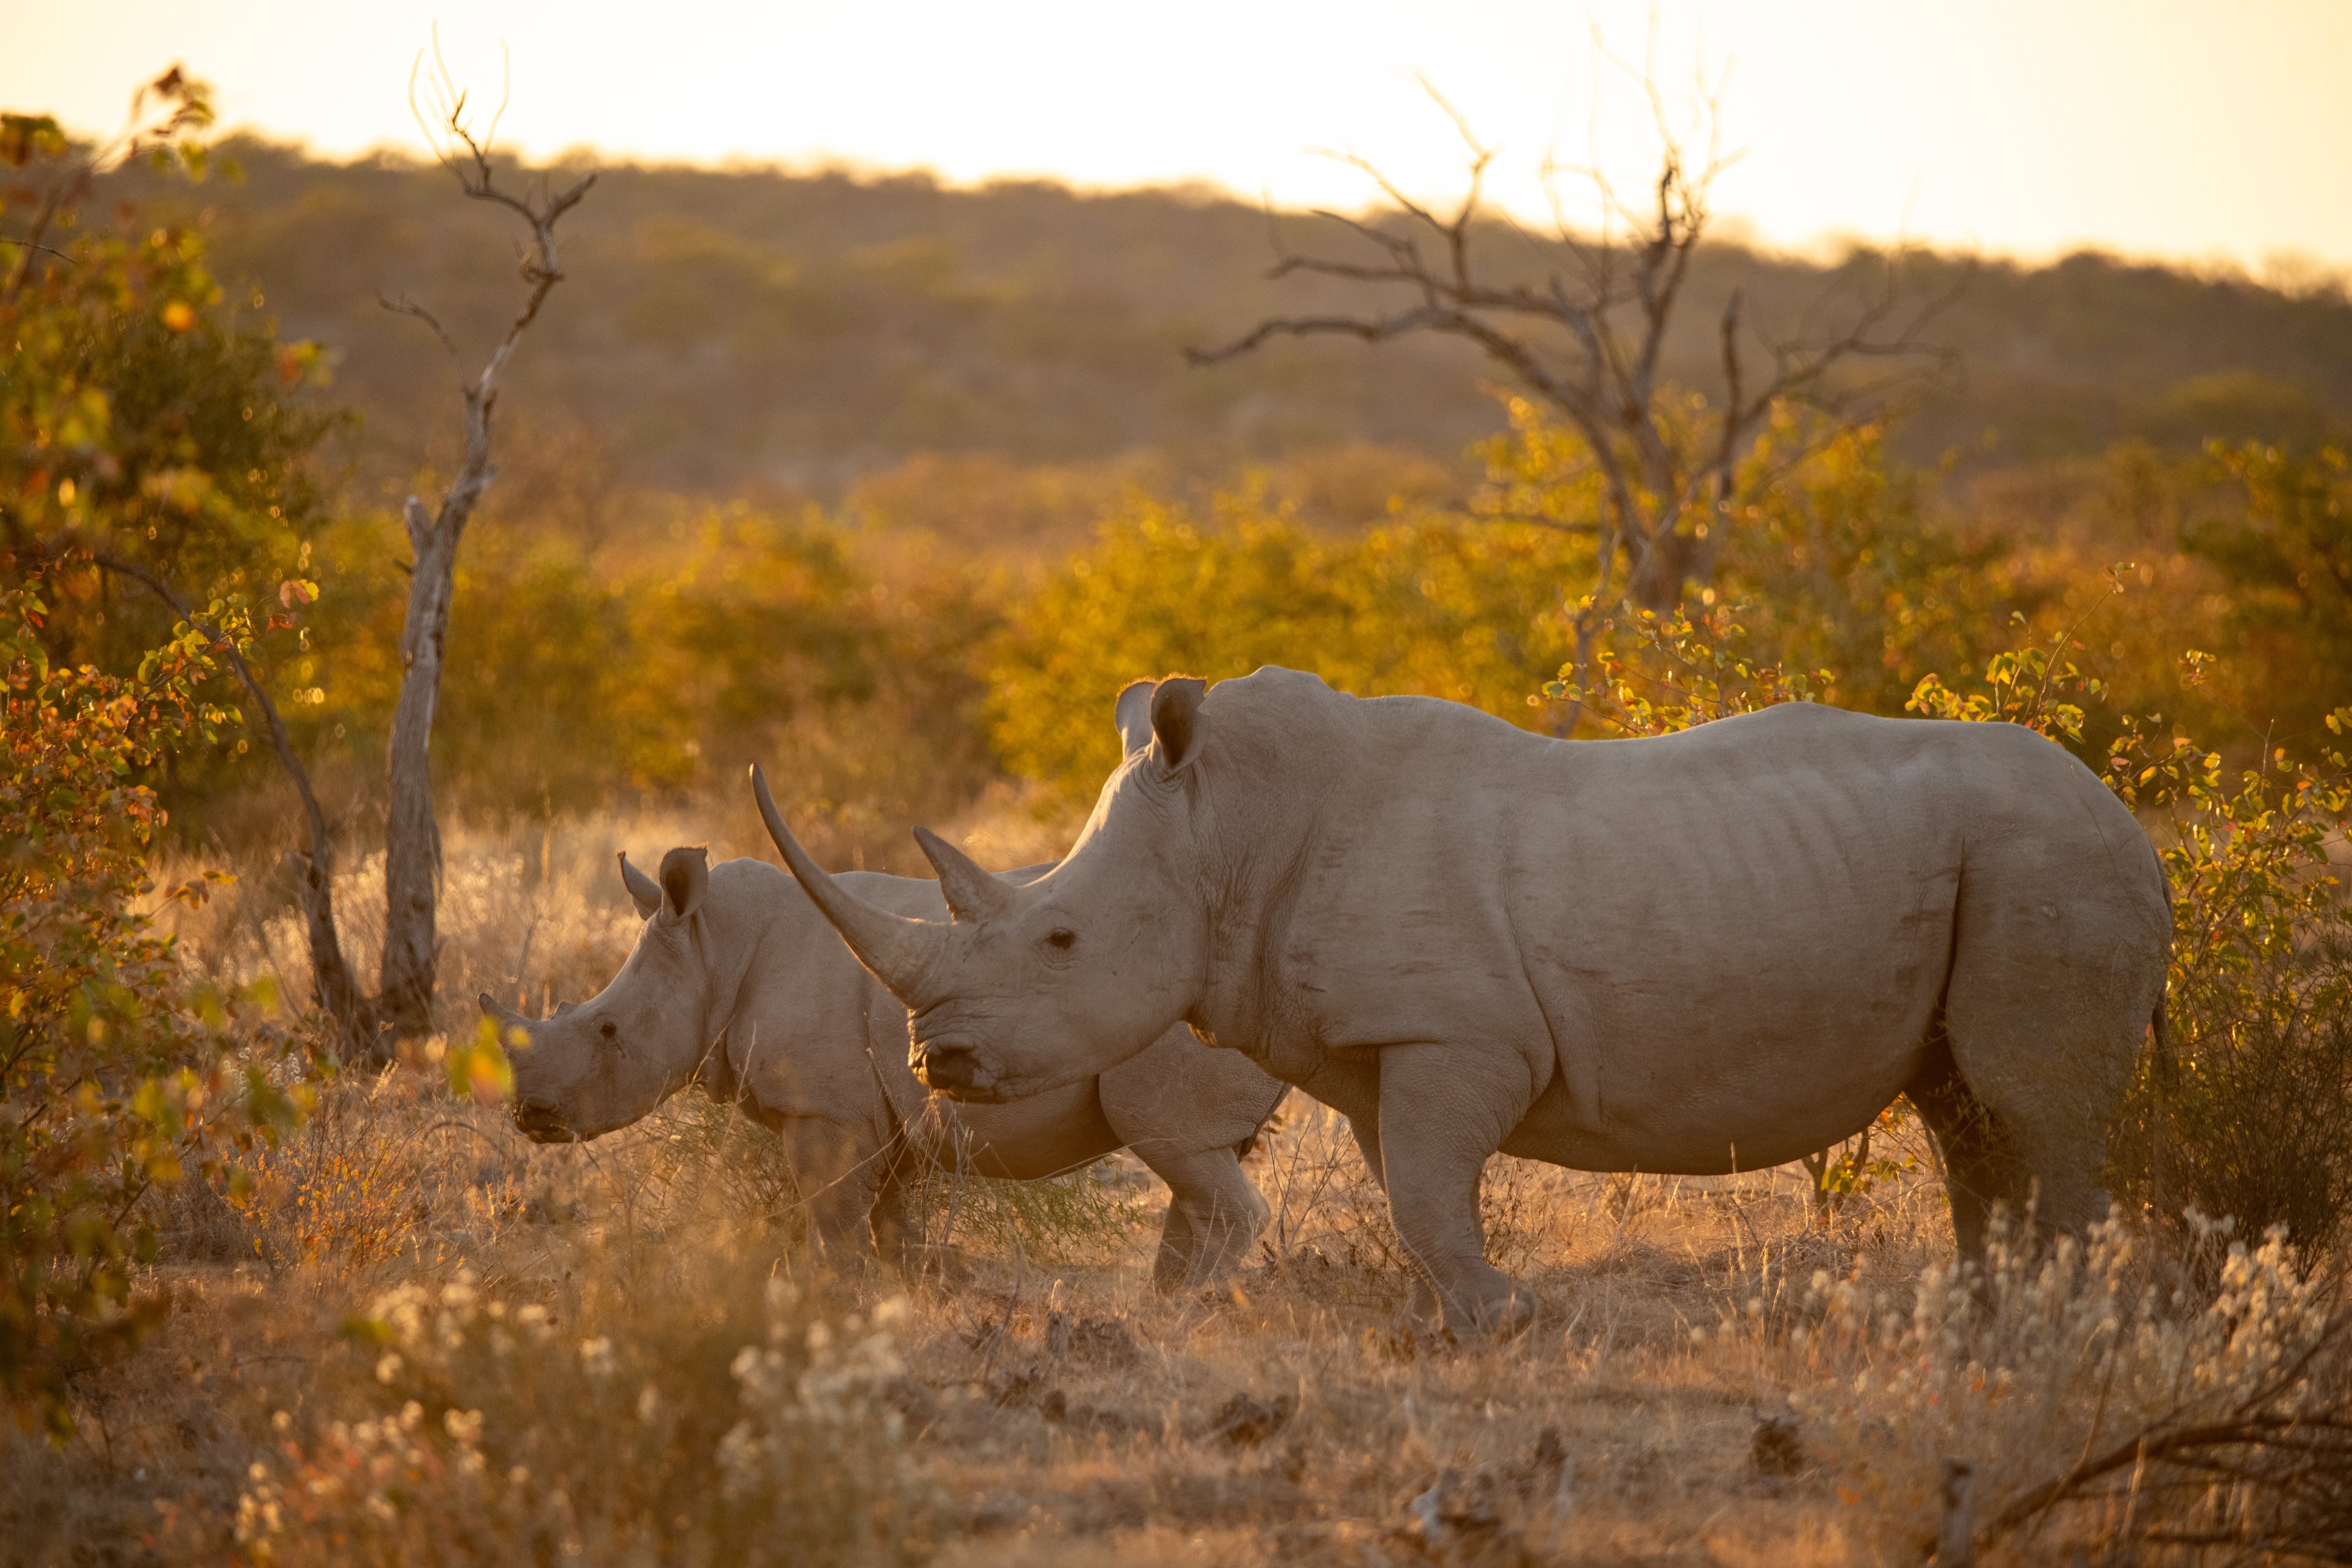 Heralds of an ancient breed, a rhino and calf stand sentinel in the sanctuary that bears their name.